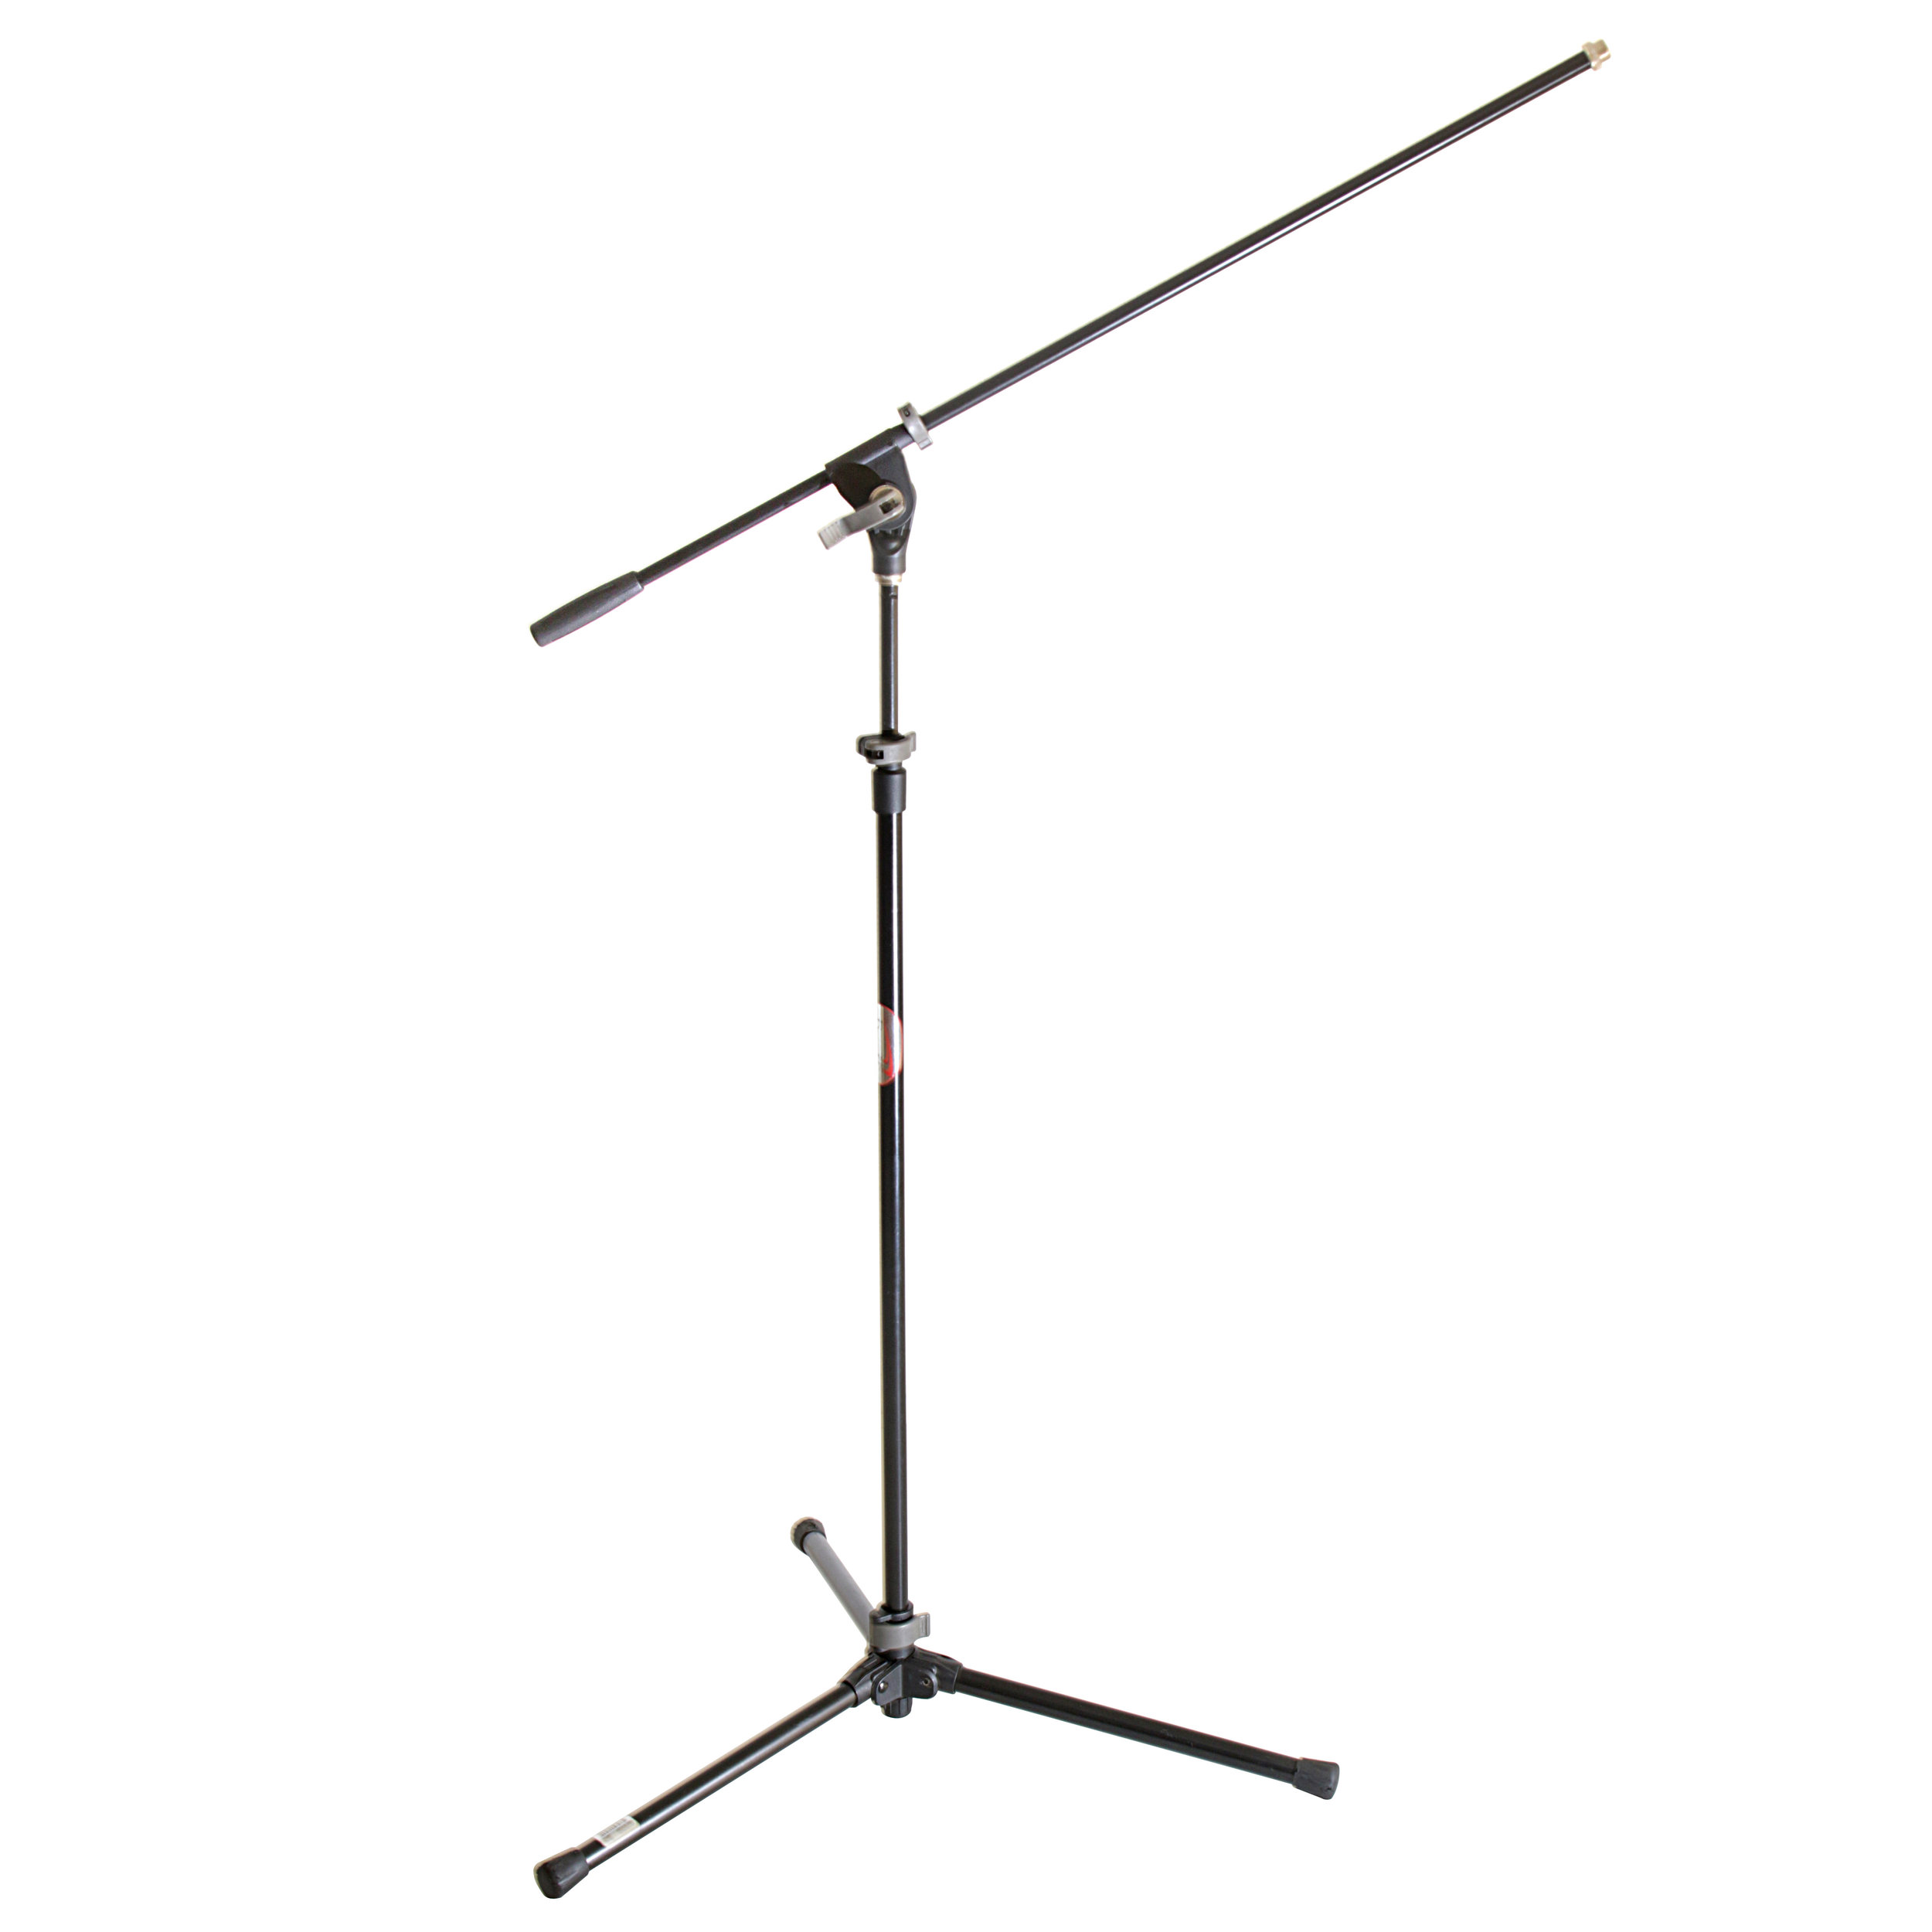 PEAK Products — Peak Stands-The Best Portable Stands